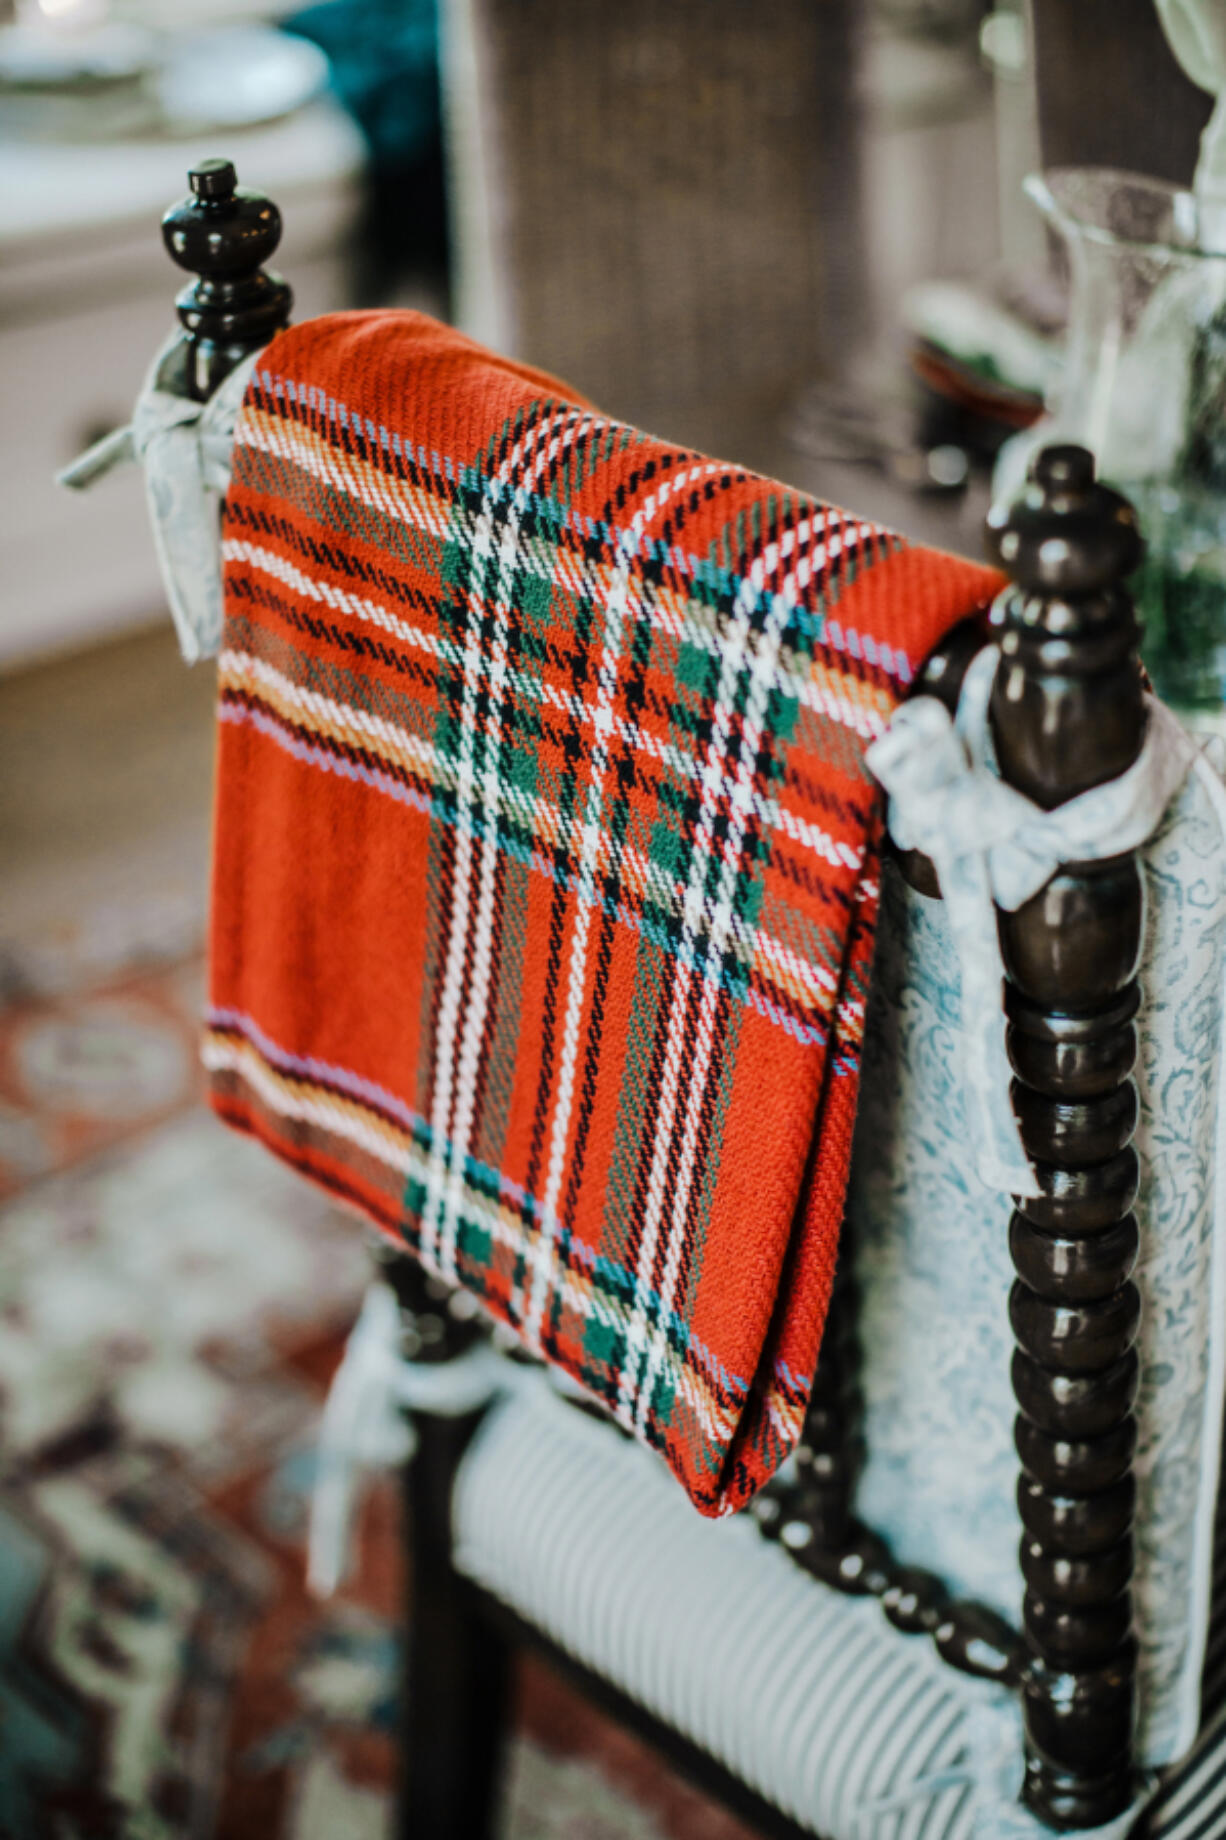 One of the most recognizable tartans is the Royal Stewart version, which is comprised of contrasting stripes of bold red, bright yellow, blue, green and white.